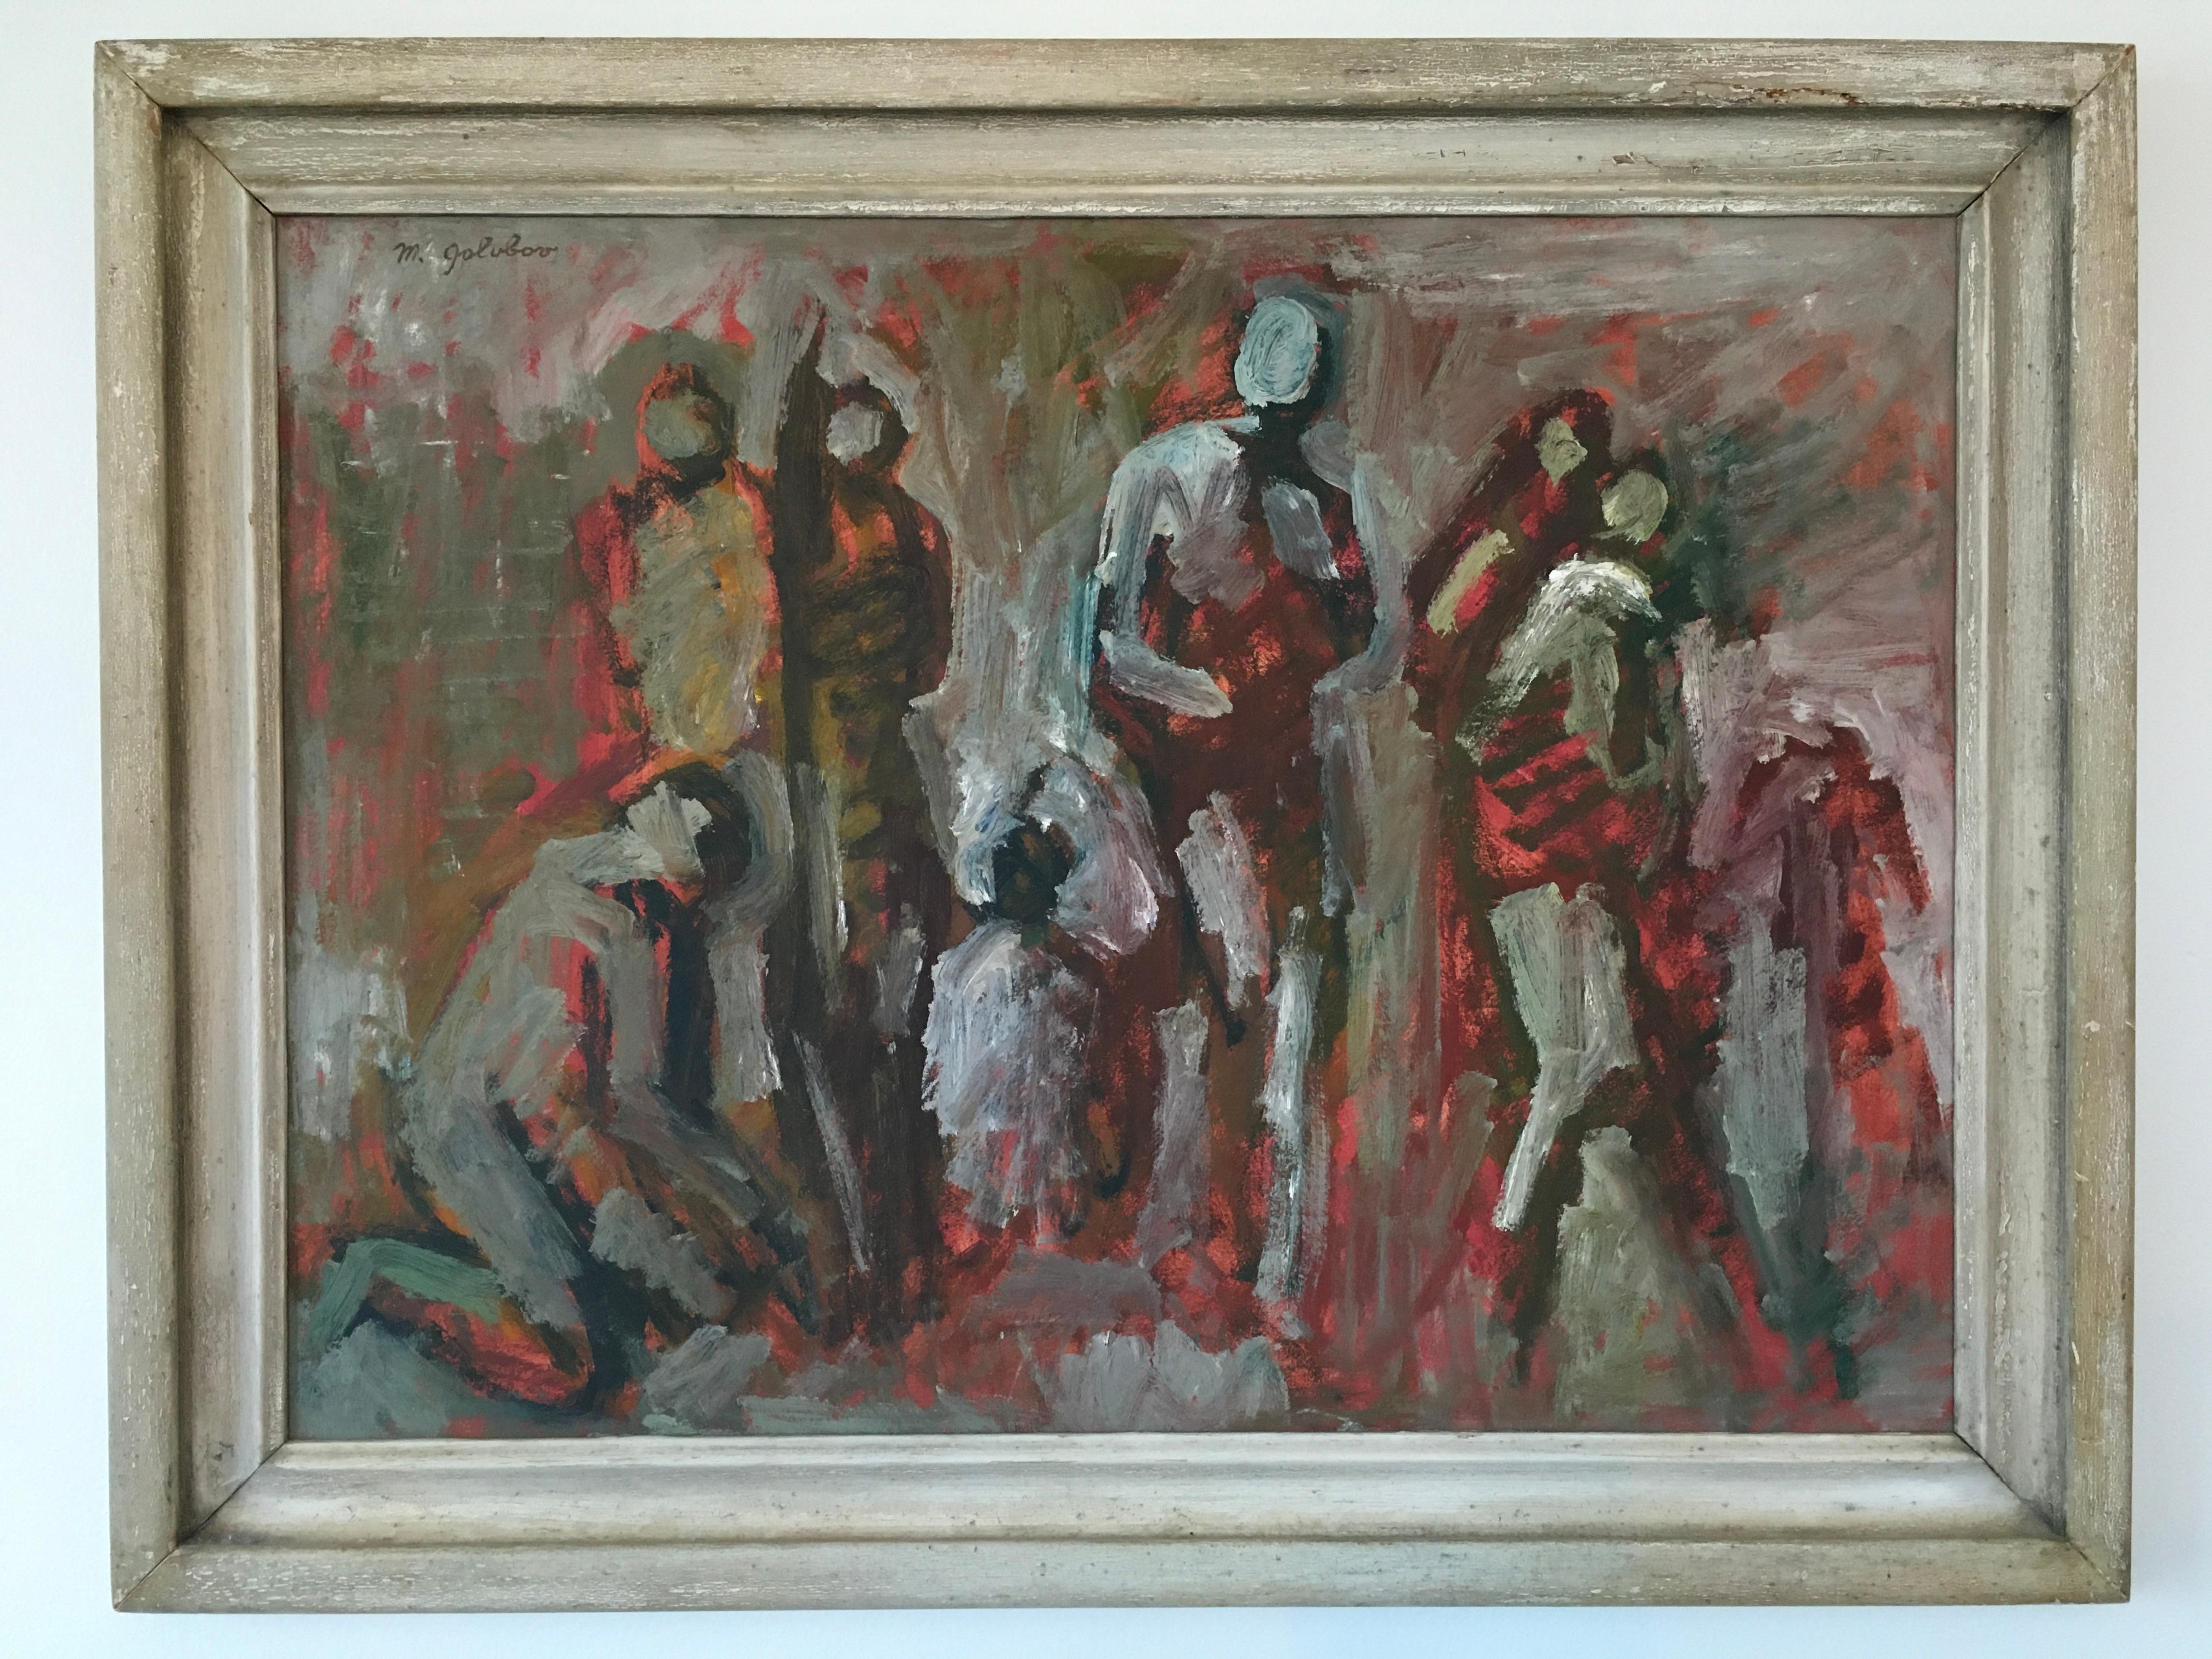 This work by Maurice Golubov, is an oil painting on board, and consists of a red, green, white, grey and brown color palette. This style of art is expressionist and figurative, with about six or seven discerned representational figures depicted.